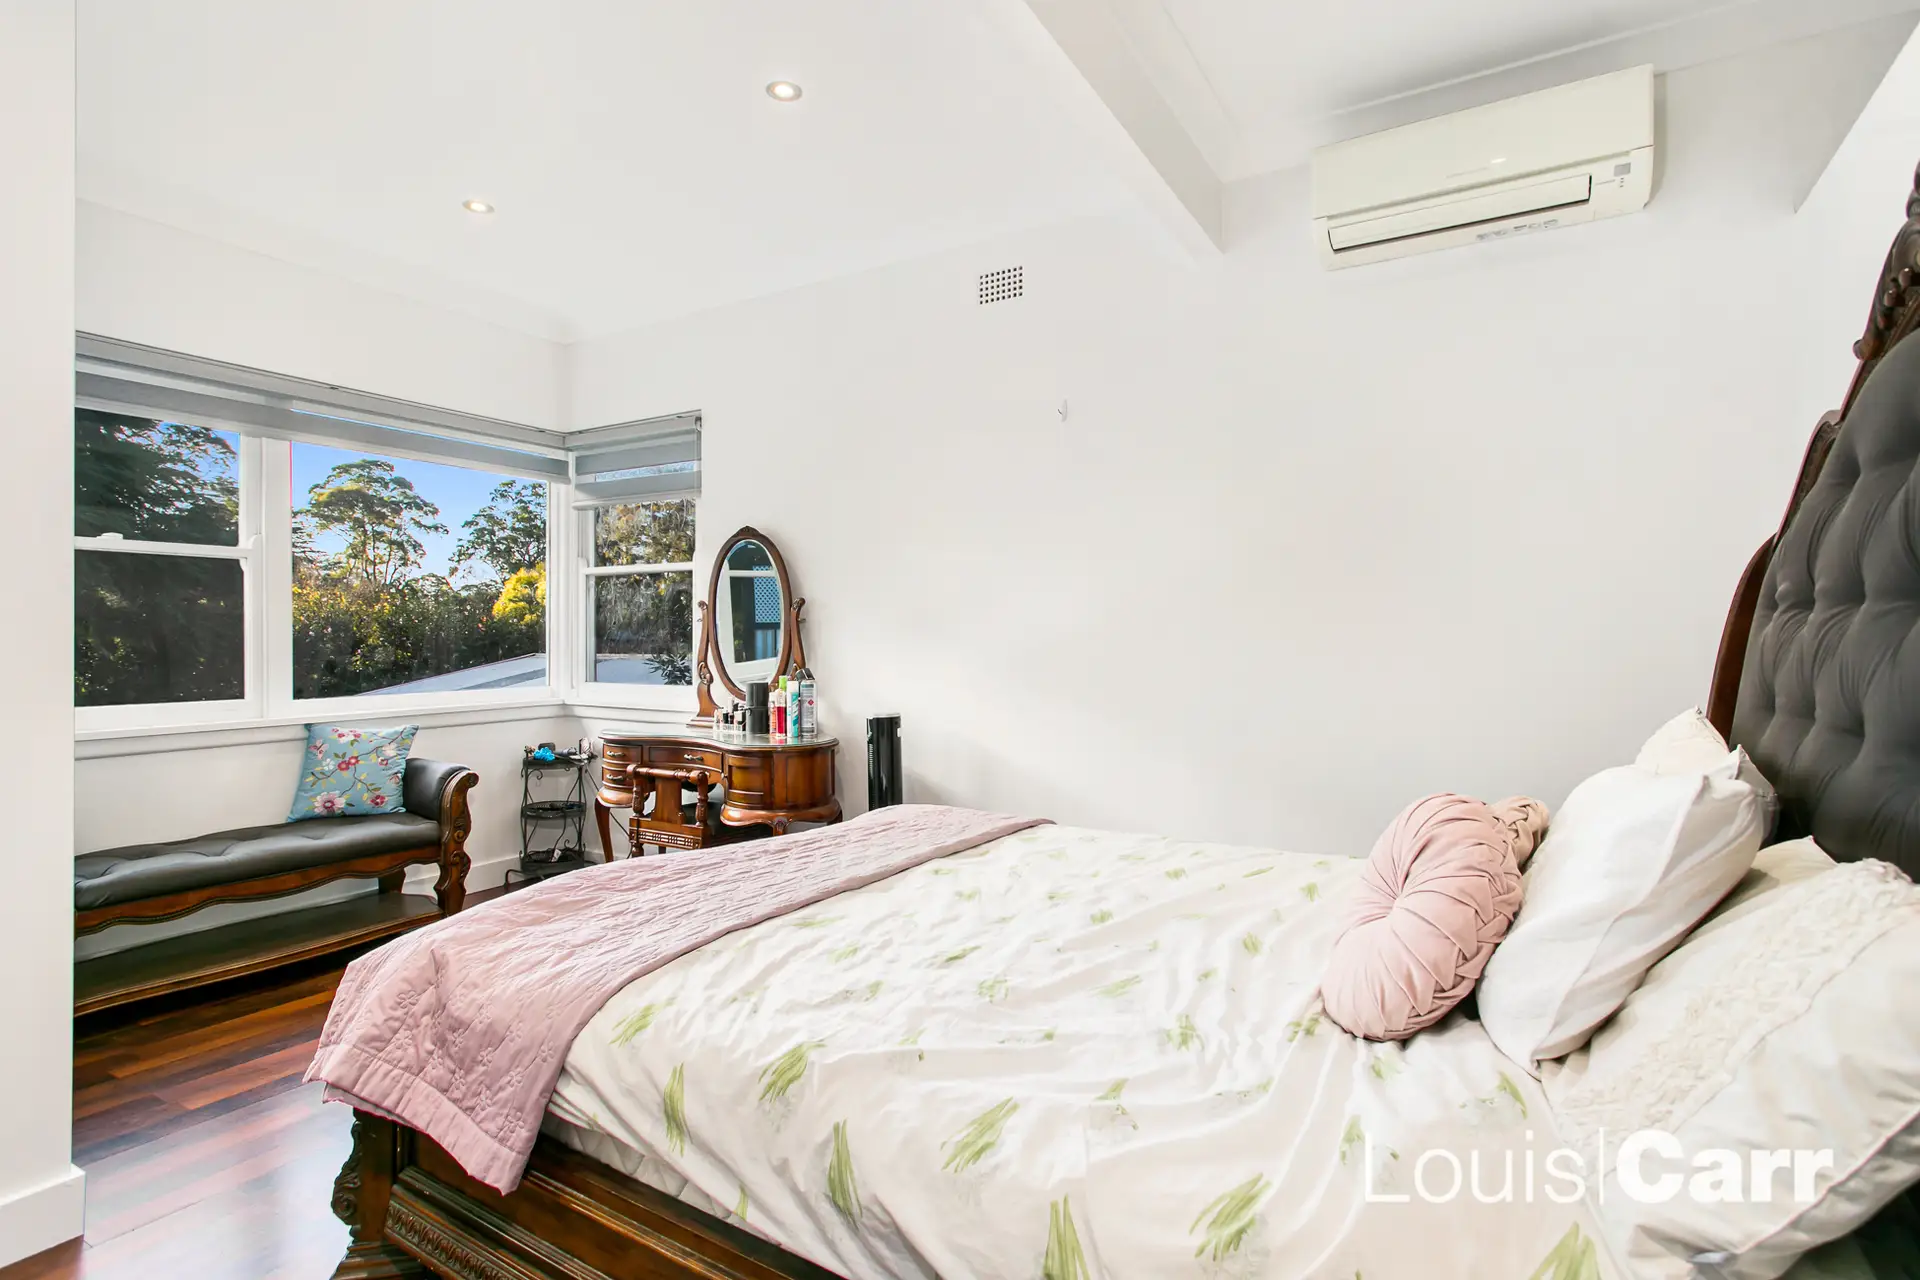 Photo #9: 23 Boyd Avenue, West Pennant Hills - Sold by Louis Carr Real Estate